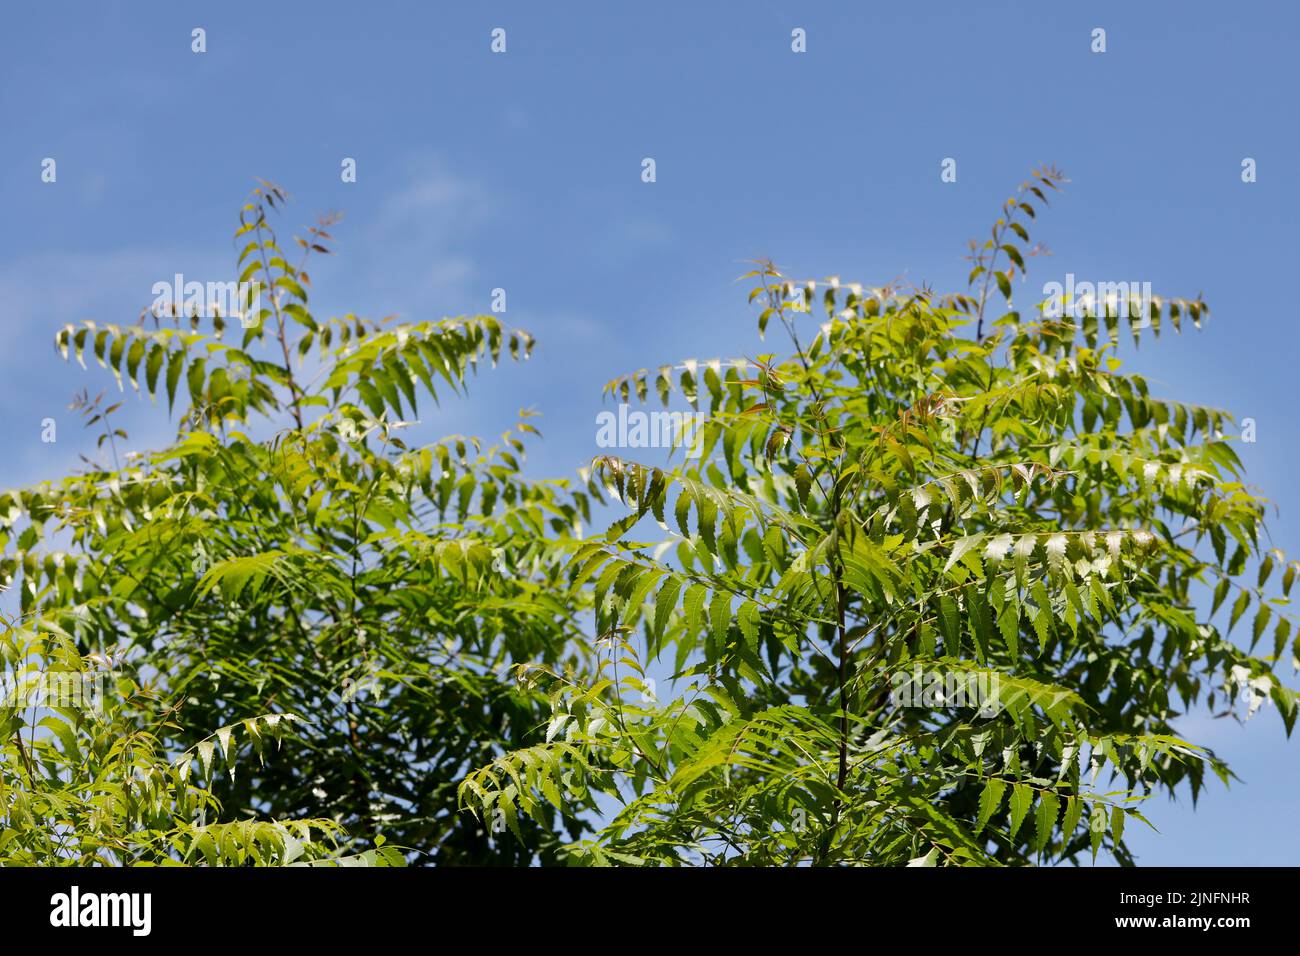 Dhaka, Bangladesh - August 11, 2022: Azadirachta indica, commonly known as neem tree or Indian lilac, is a tree in the mahogany family Meliaceae, Dhak Stock Photo